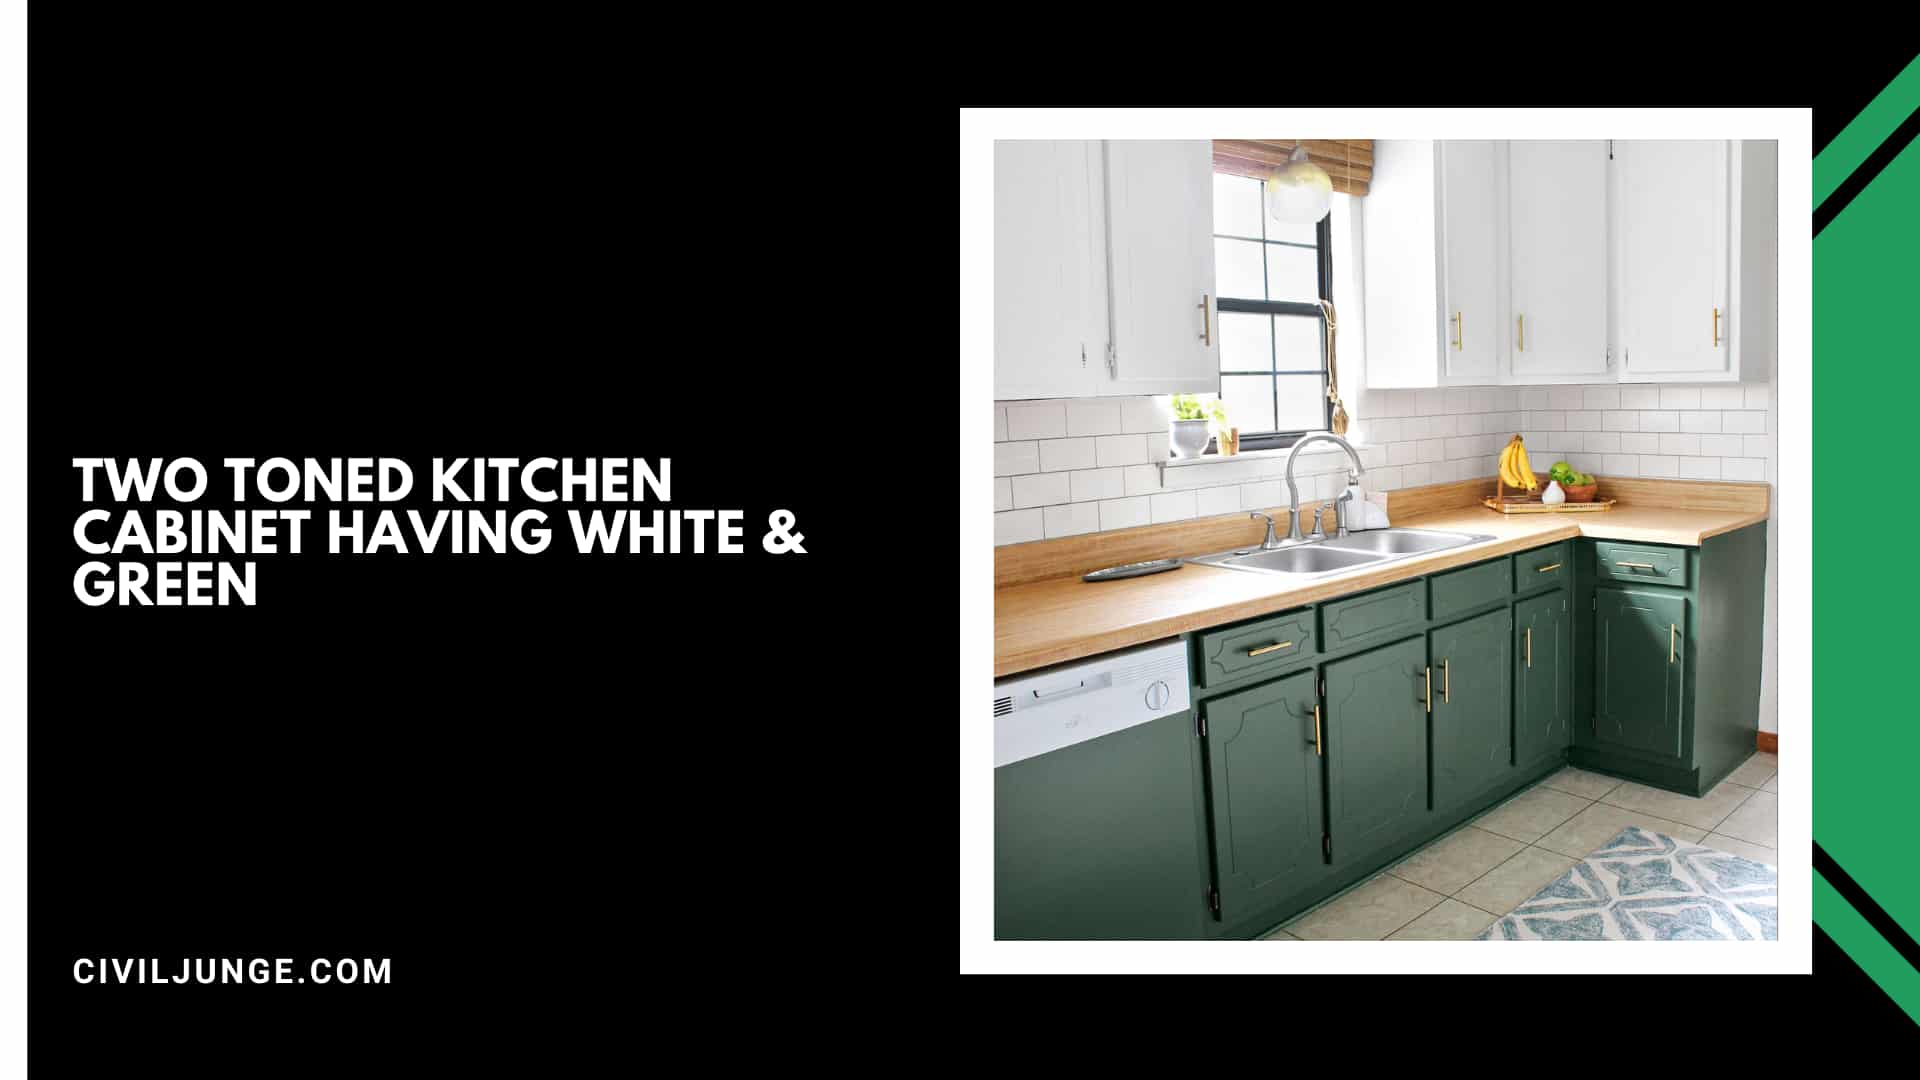 Two Toned Kitchen Cabinet Having White & Green